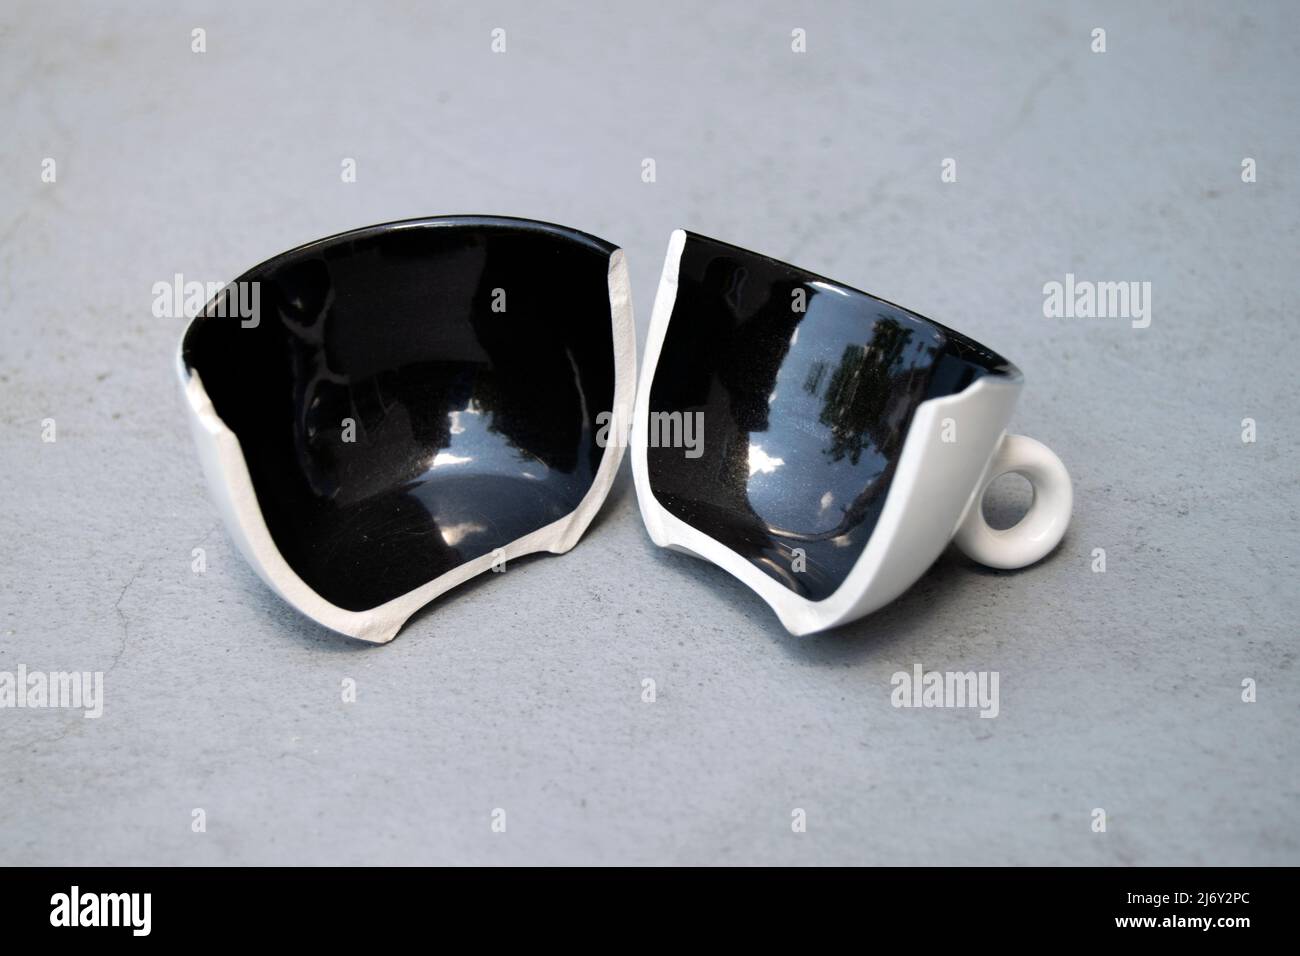 Cup of tea broken apart. Divorce and separation concept. Division of property in divorces, lawsuits. Broken relationships, division. Accidents and insurance. Stock Photo